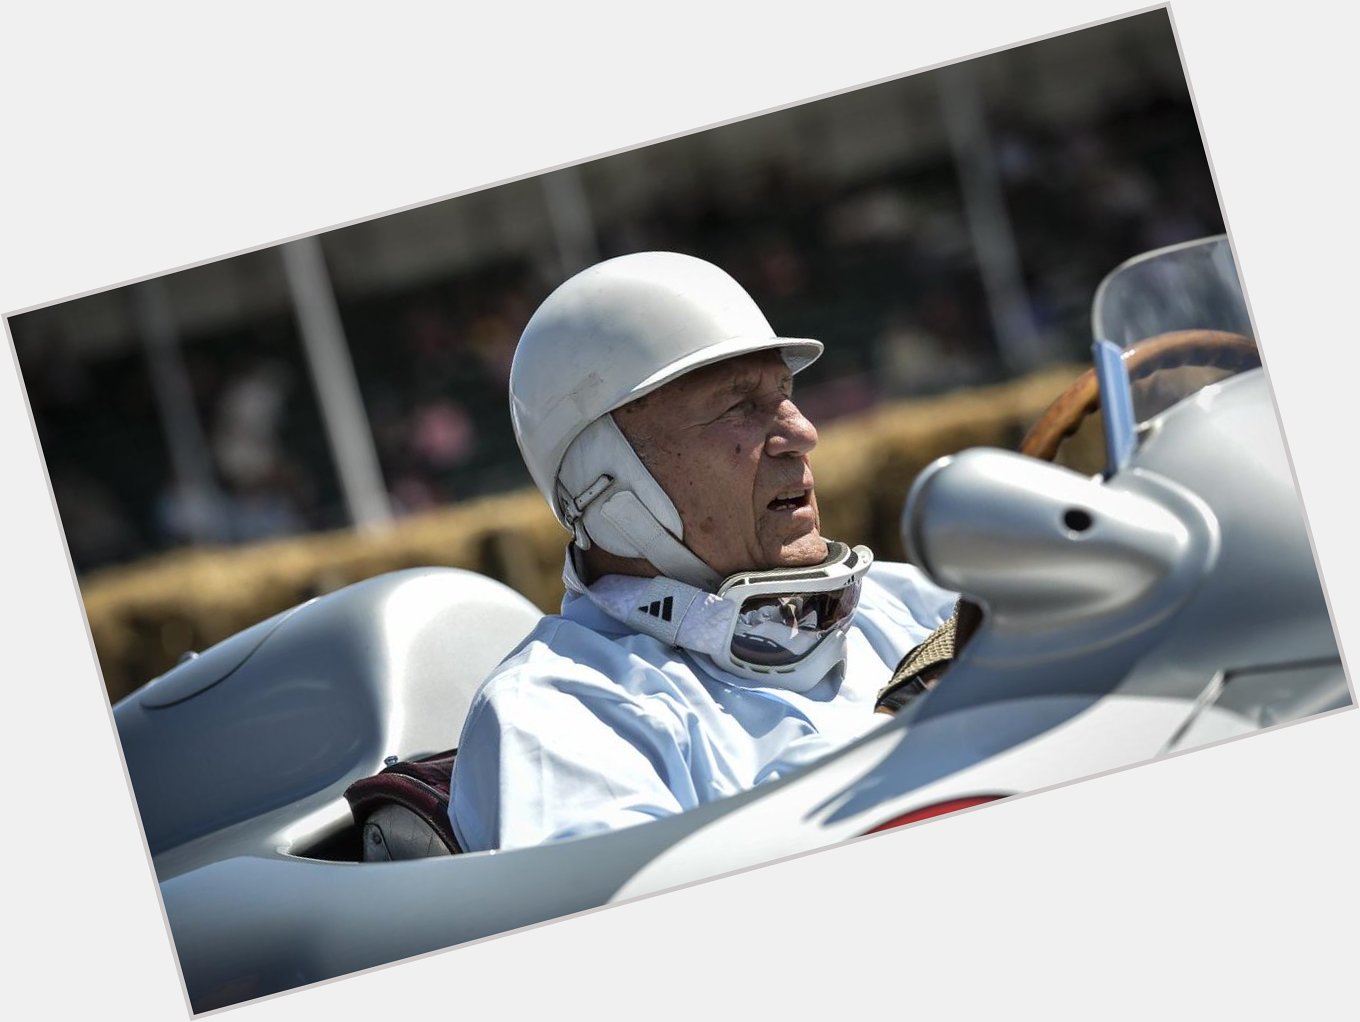 HAPPY BIRTHDAY!  Sir Stirling Moss is 86, and Damon Hill turns 55 today.  